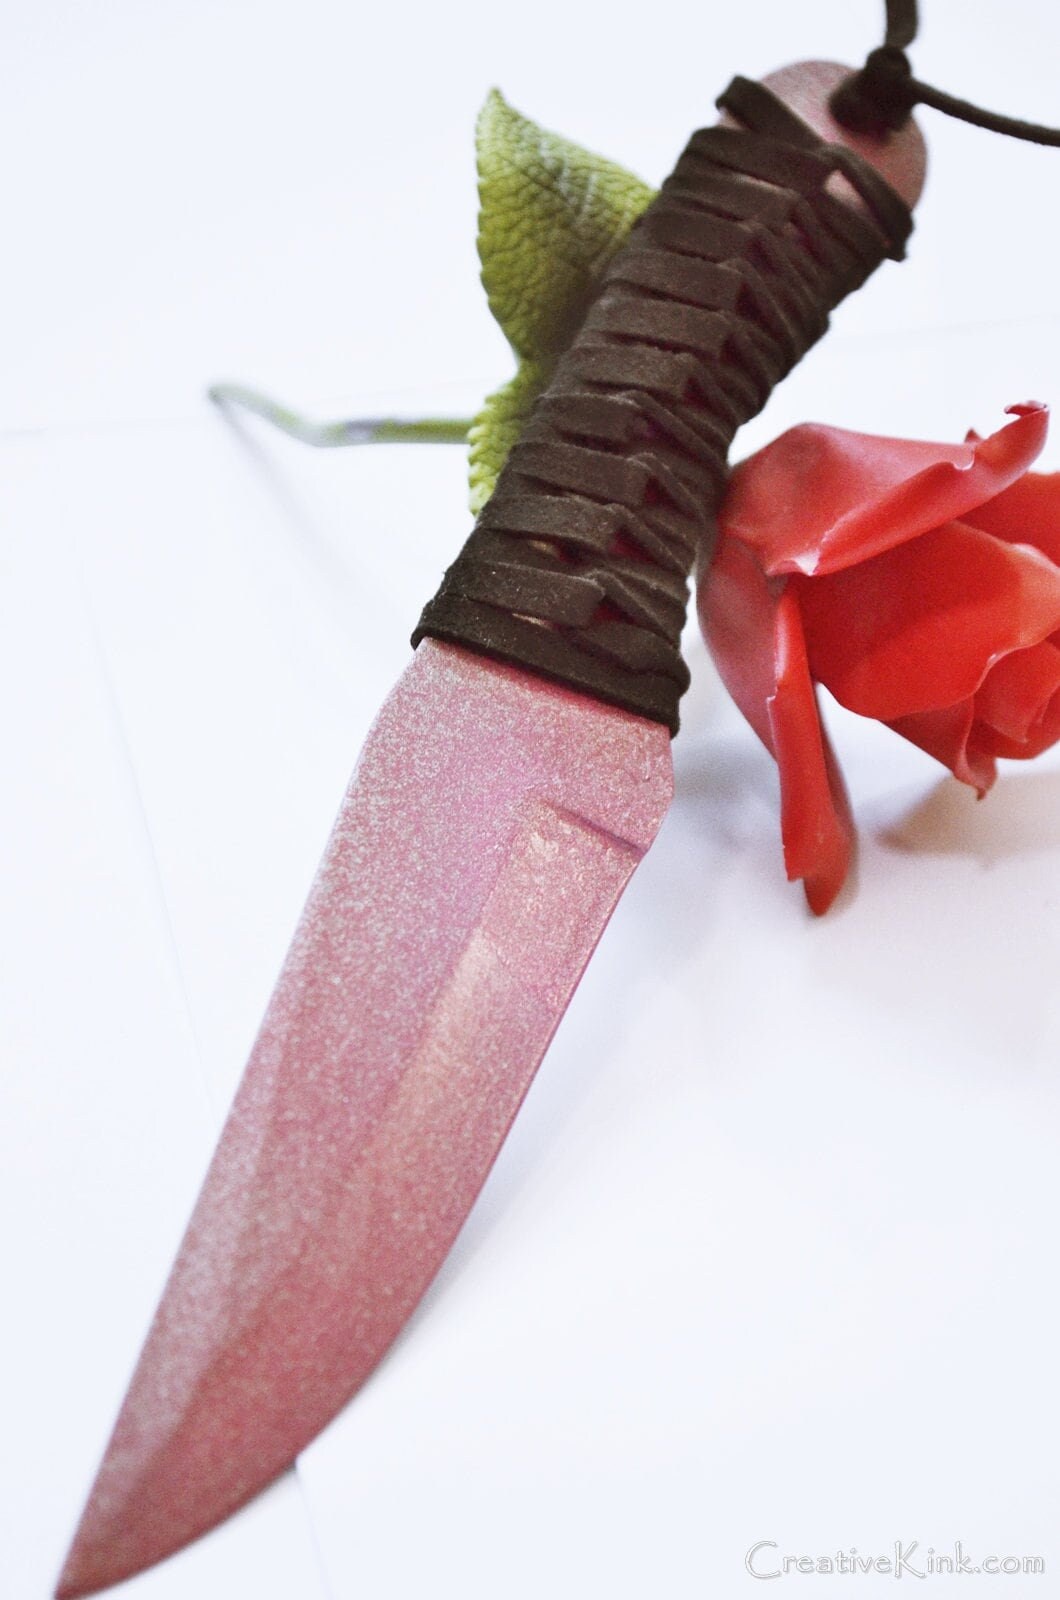 TWO PINKS - Bright Silver Sparkles in Happiness Bleeding onto Steel -- 8" Dark & Light Pinks, Leather Wrapped Grip- BDSM Knife Play Sex Toy